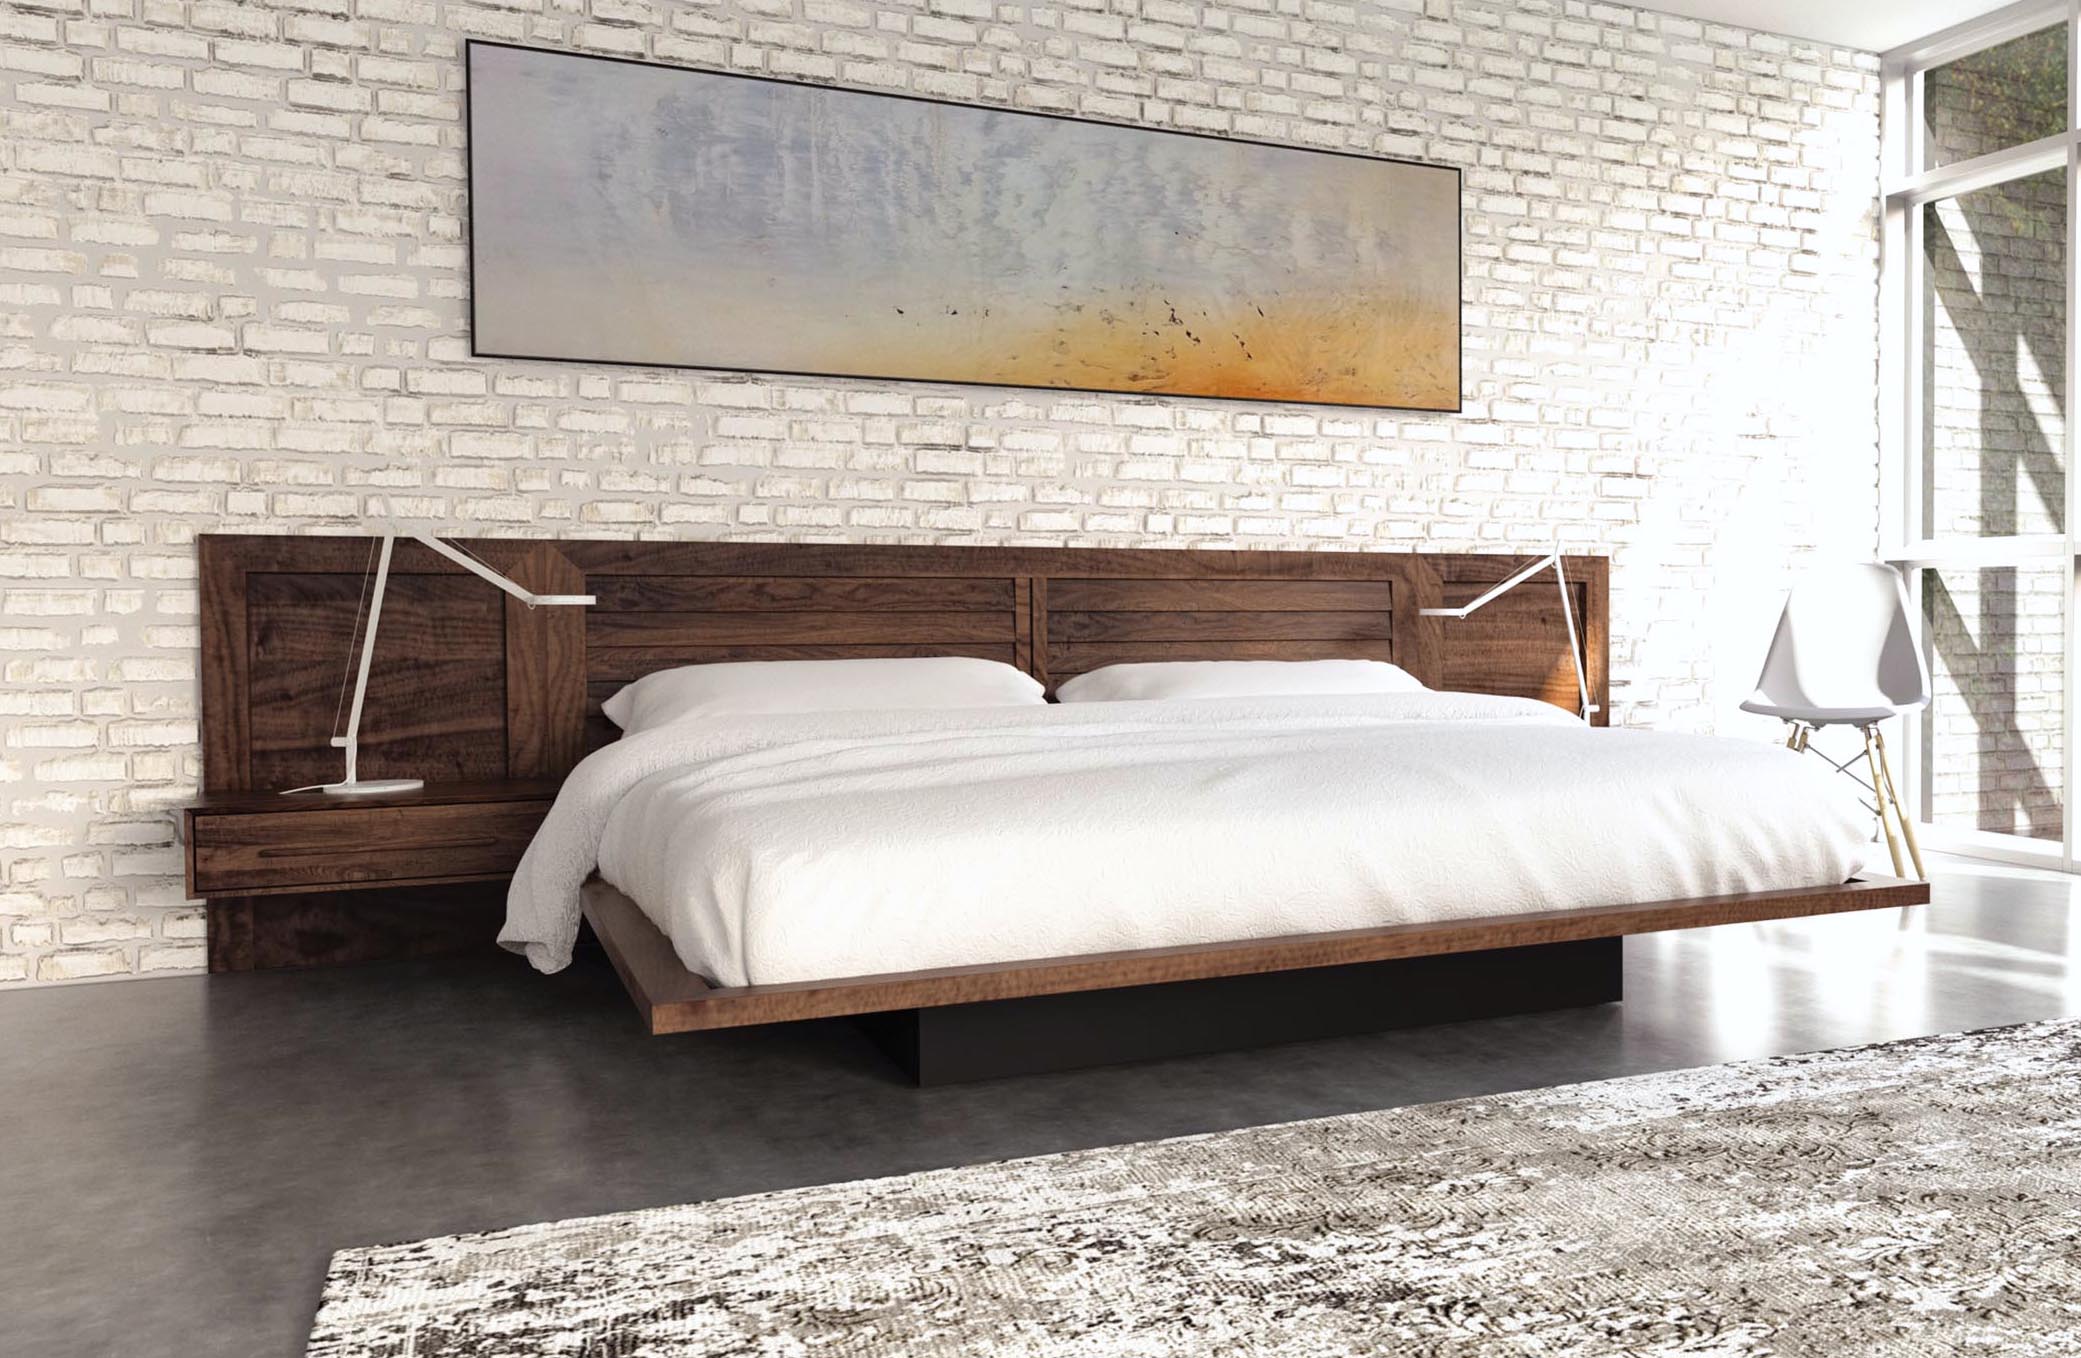 cooke and lewis modular bedroom furniture